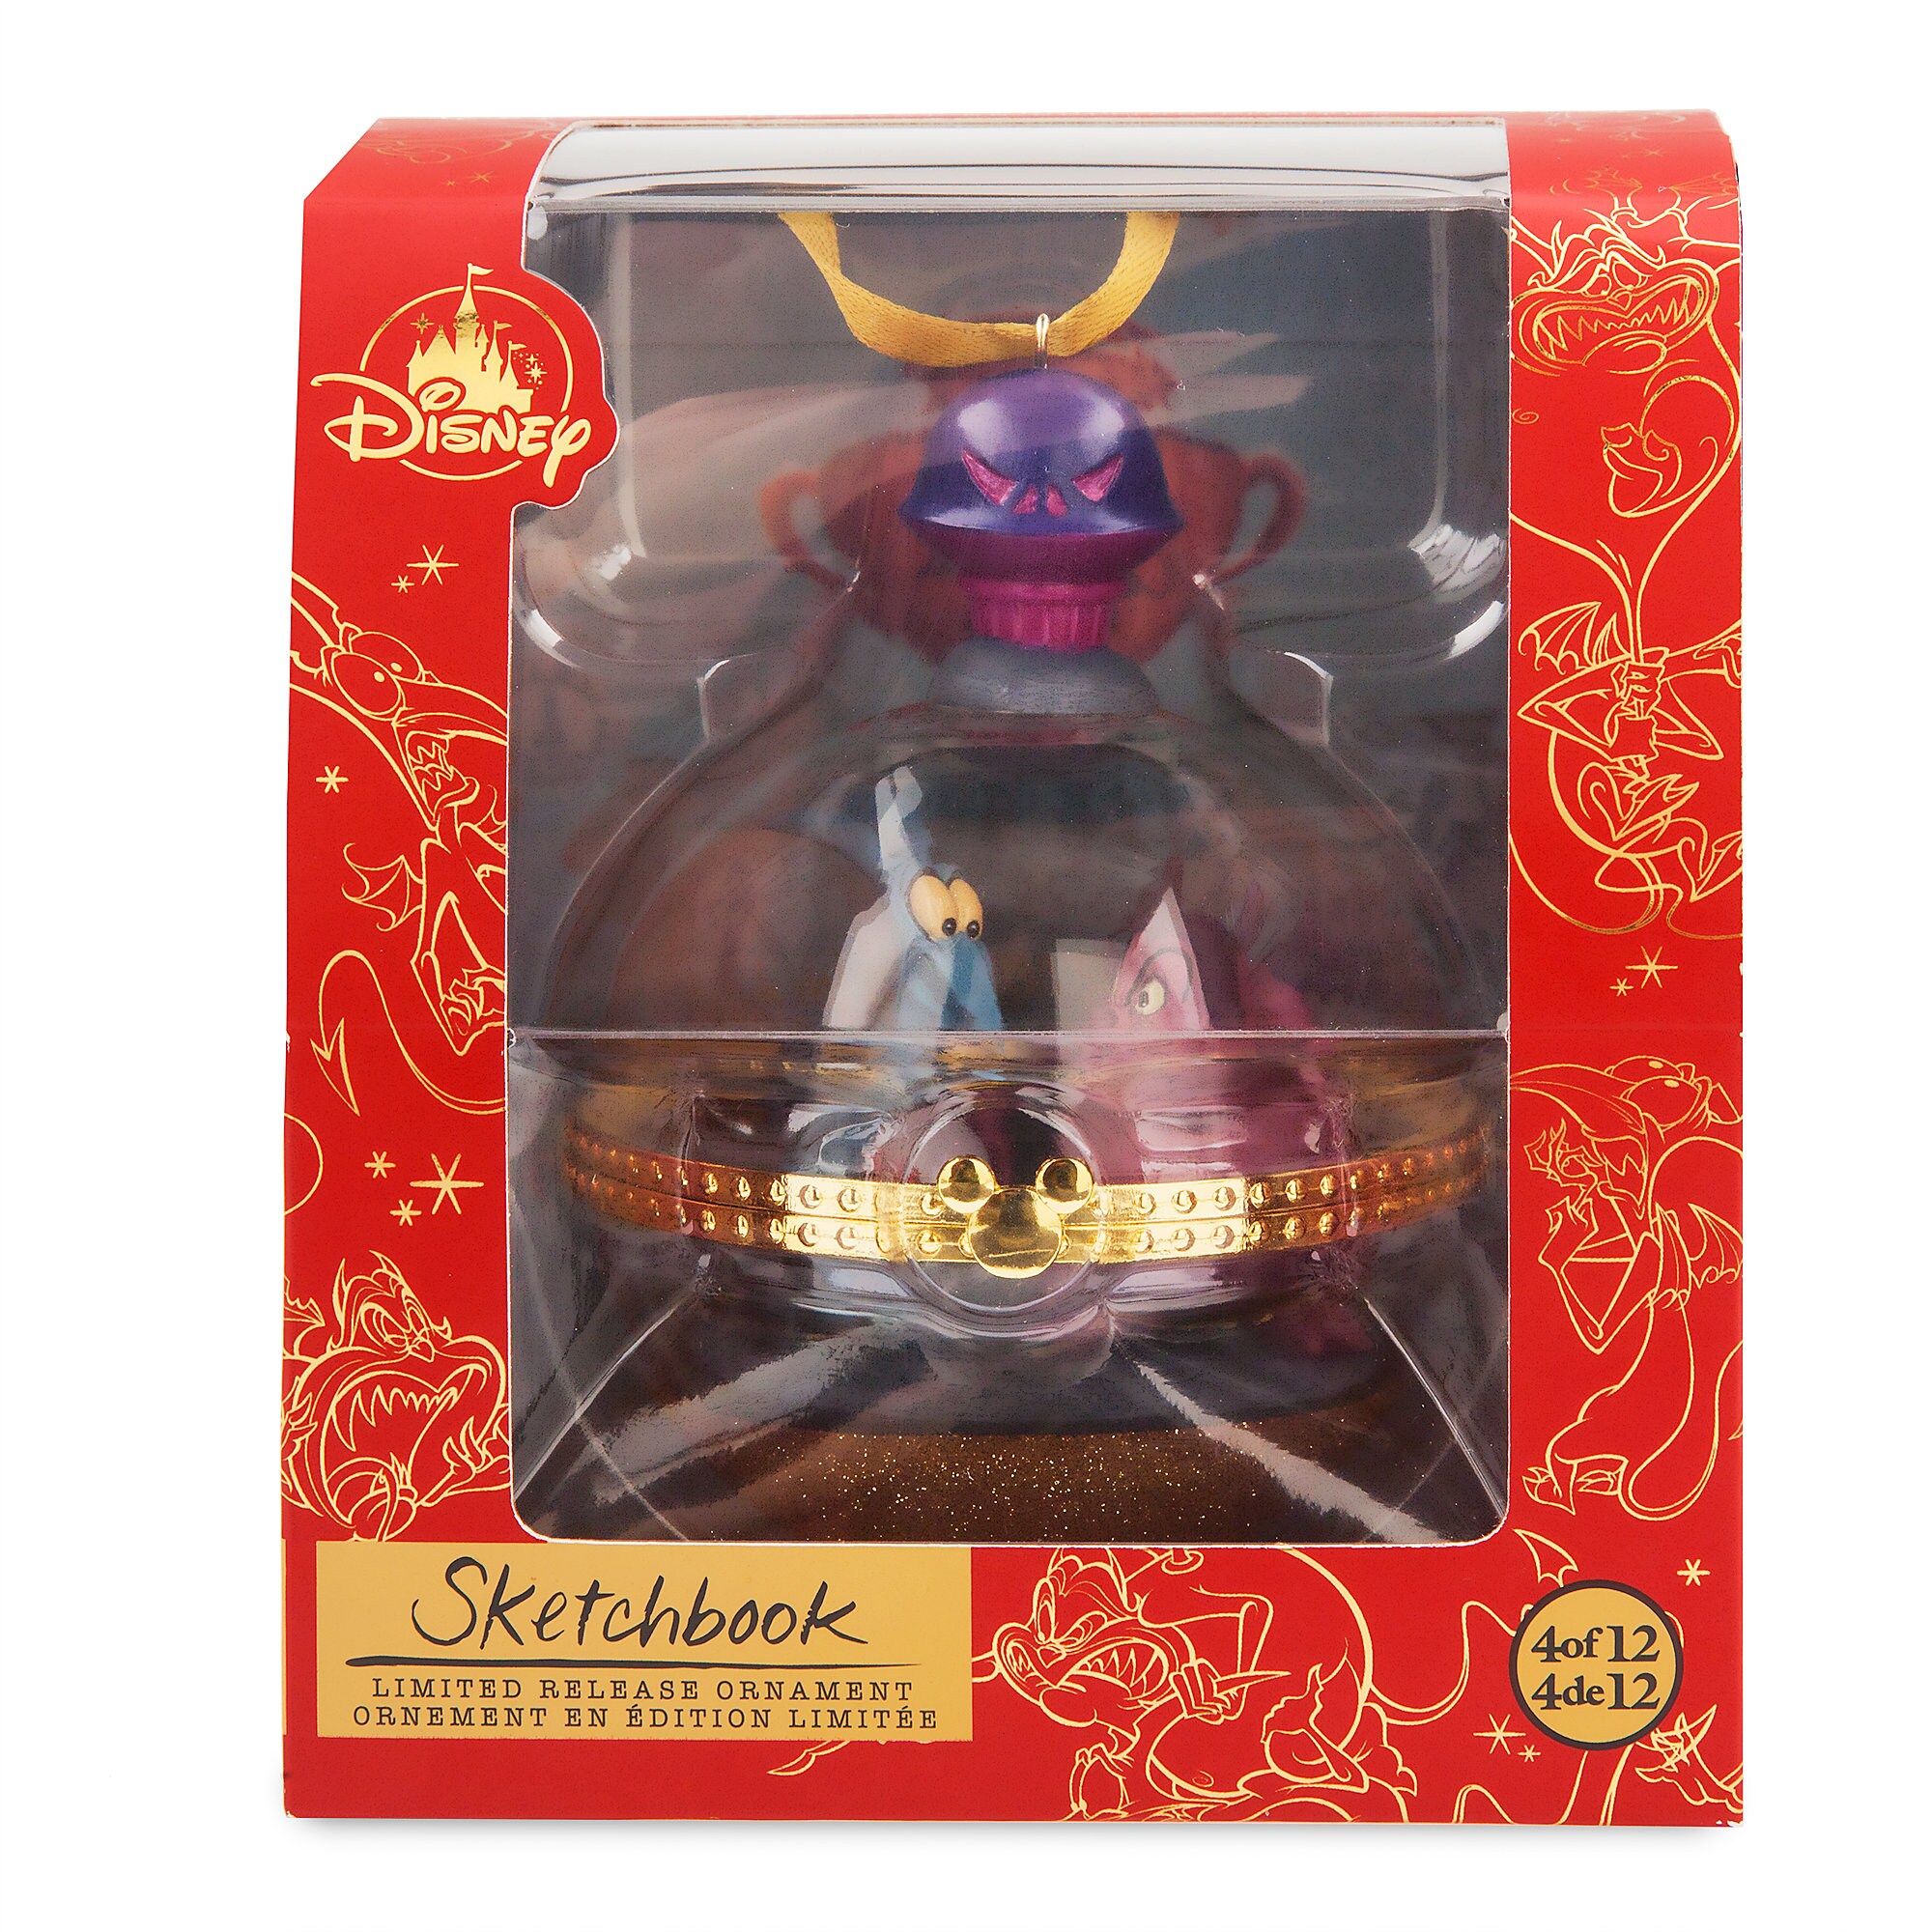 Pain and Panic Disney Duos Sketchbook Ornament - Hercules - April - Limited Release